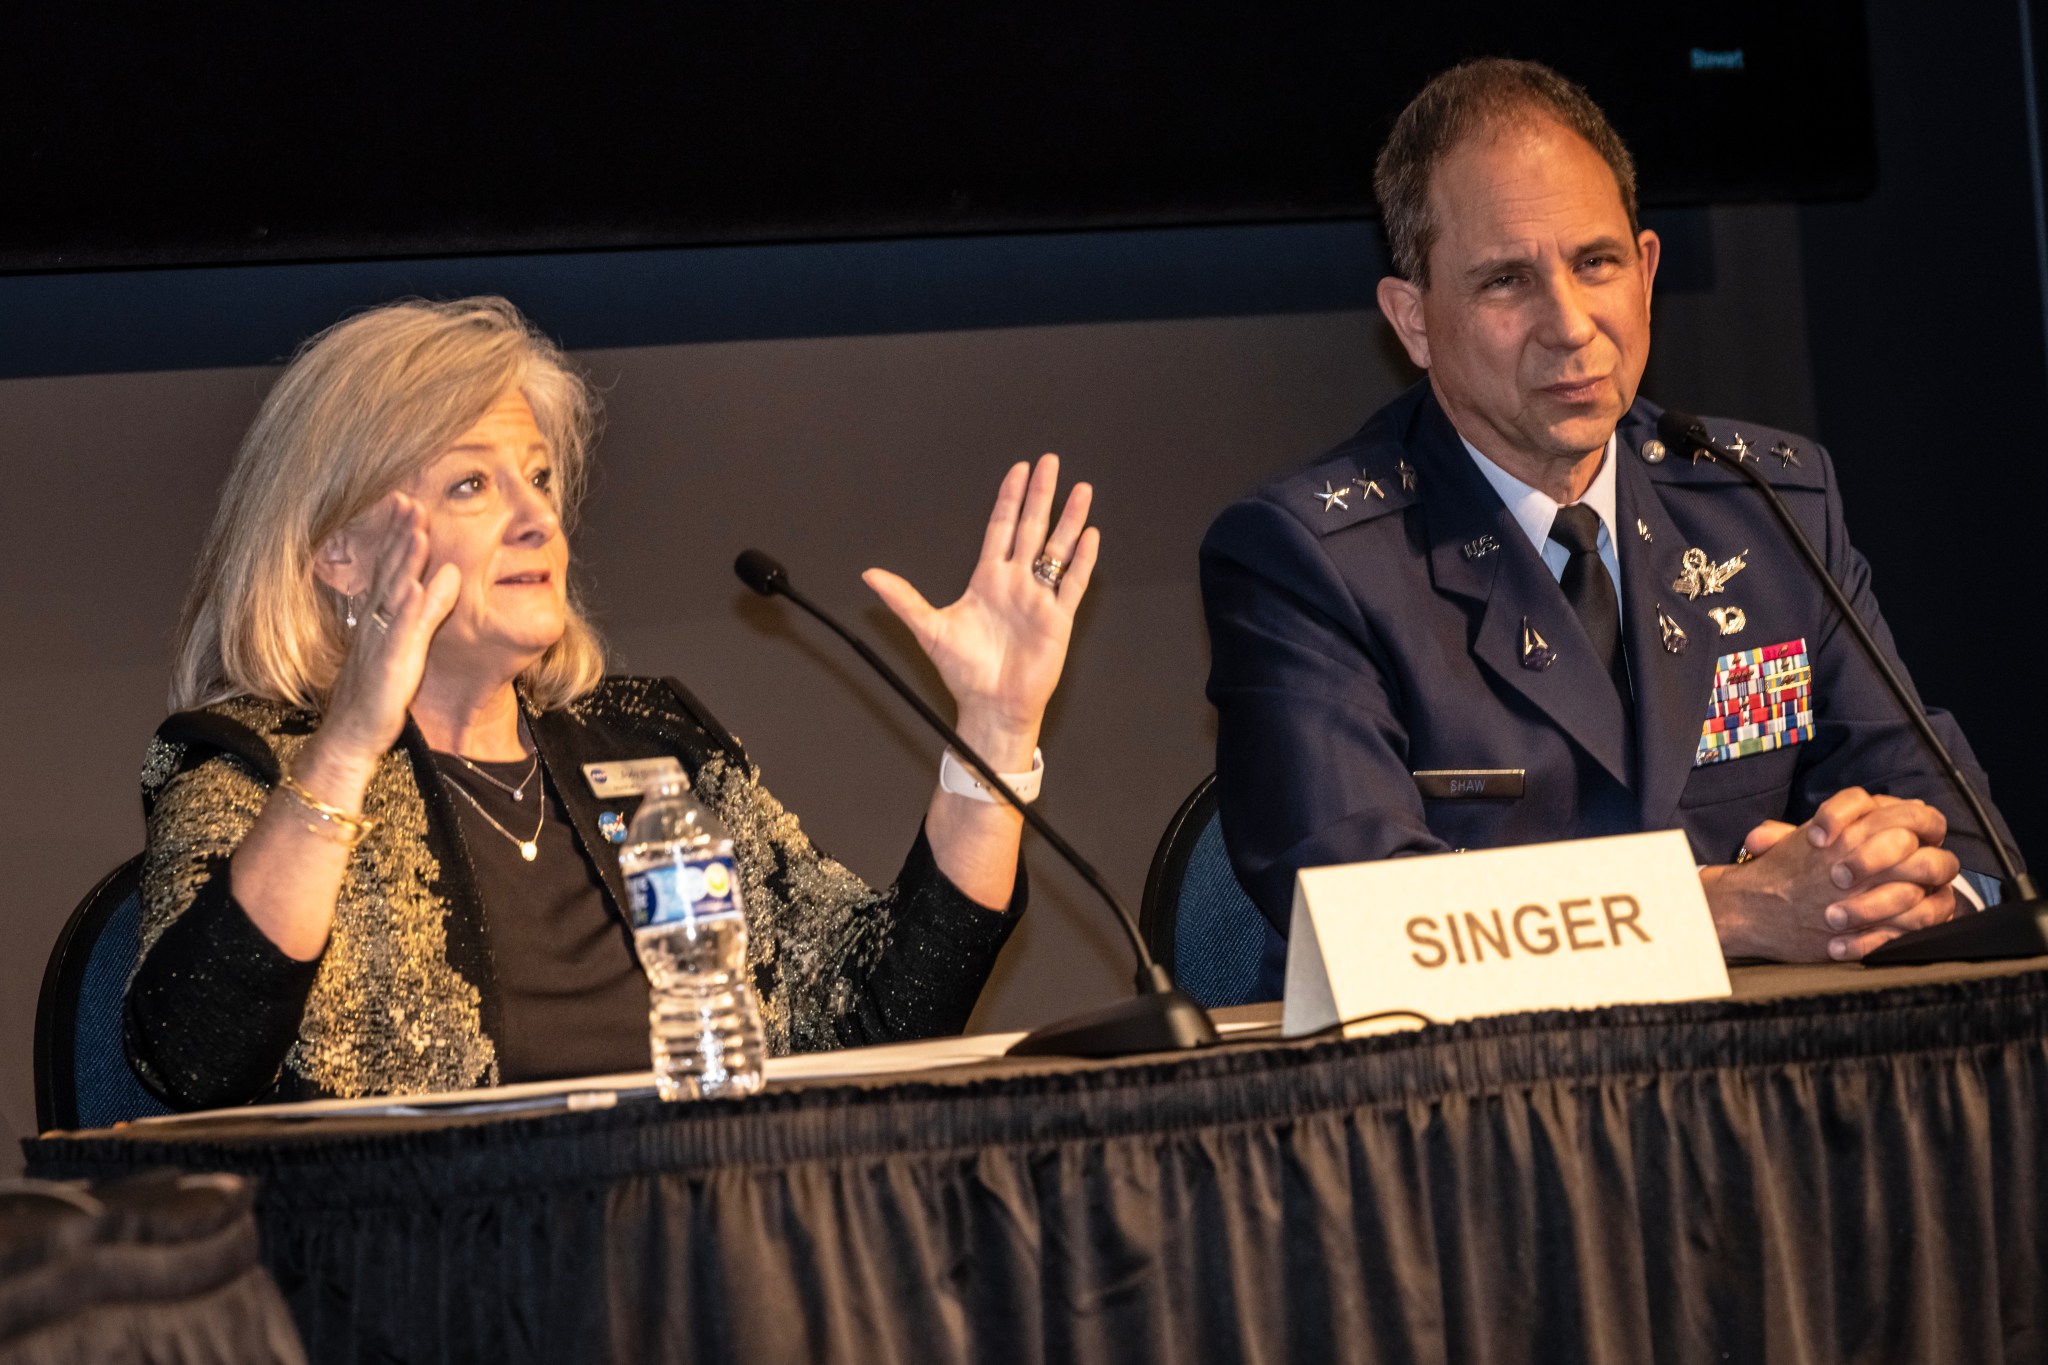 NASA Marshall Space Flight Center Director Jody Singer, left, and Lt. Gen. John Shaw, deputy commander of United States Space Command, right, sit a table to present at the 2022 Wernher von Braun Symposium